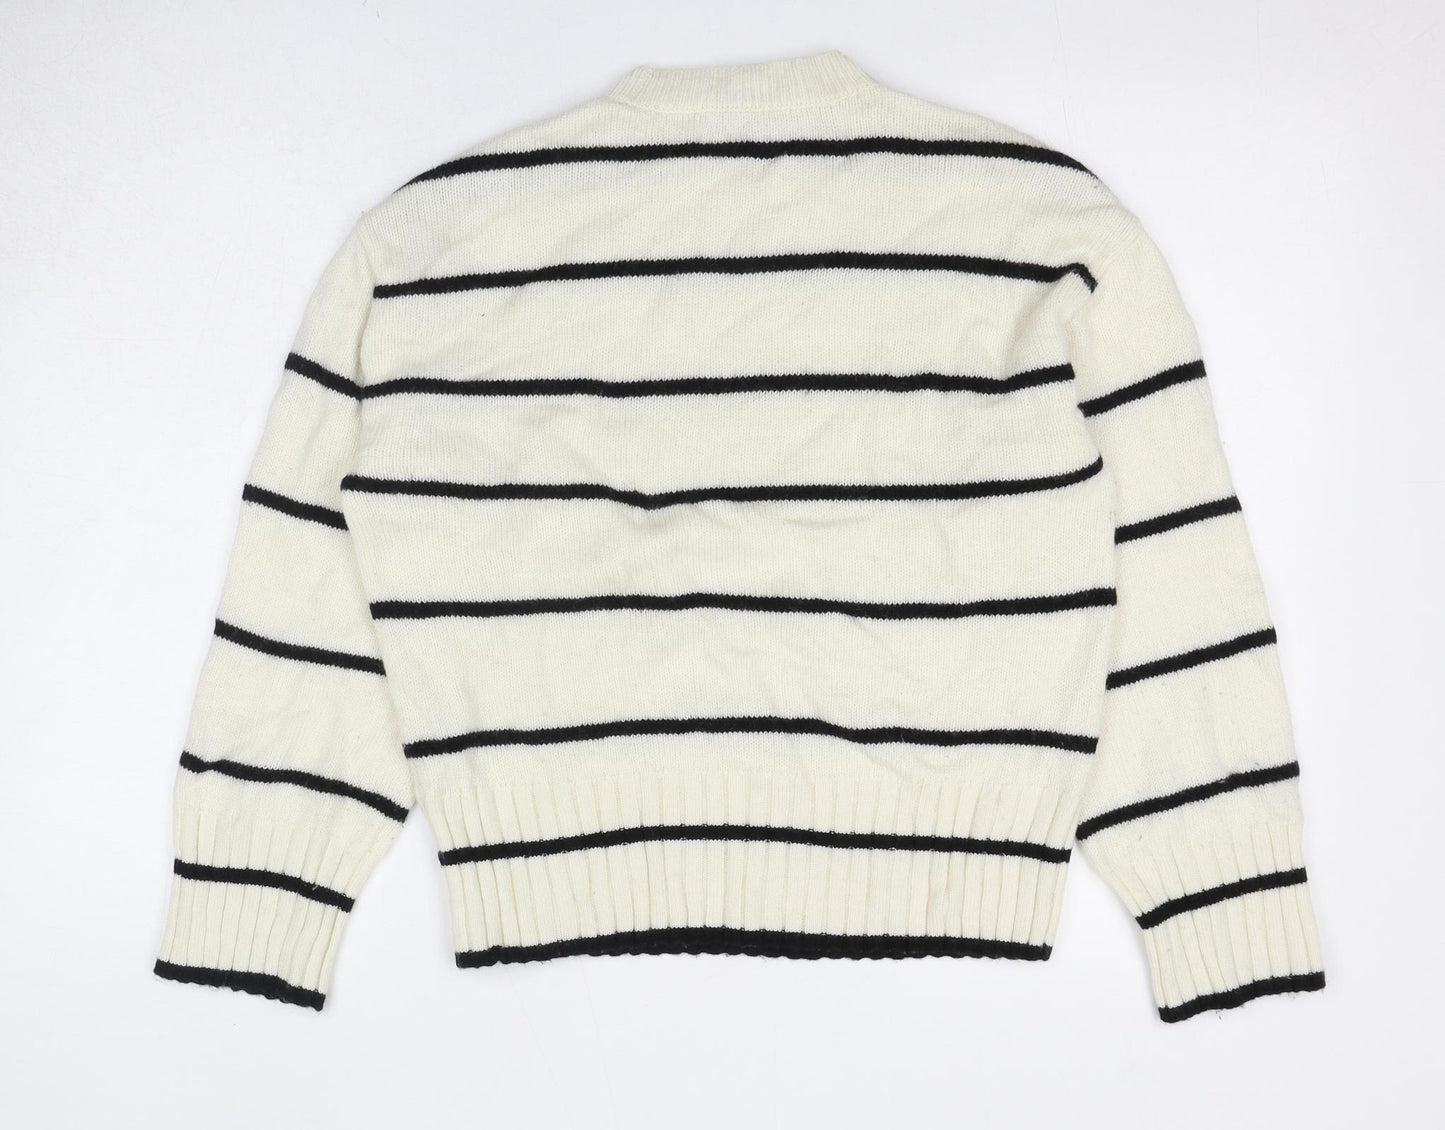 Autograph Womens Ivory Round Neck Striped Wool Pullover Jumper Size 10